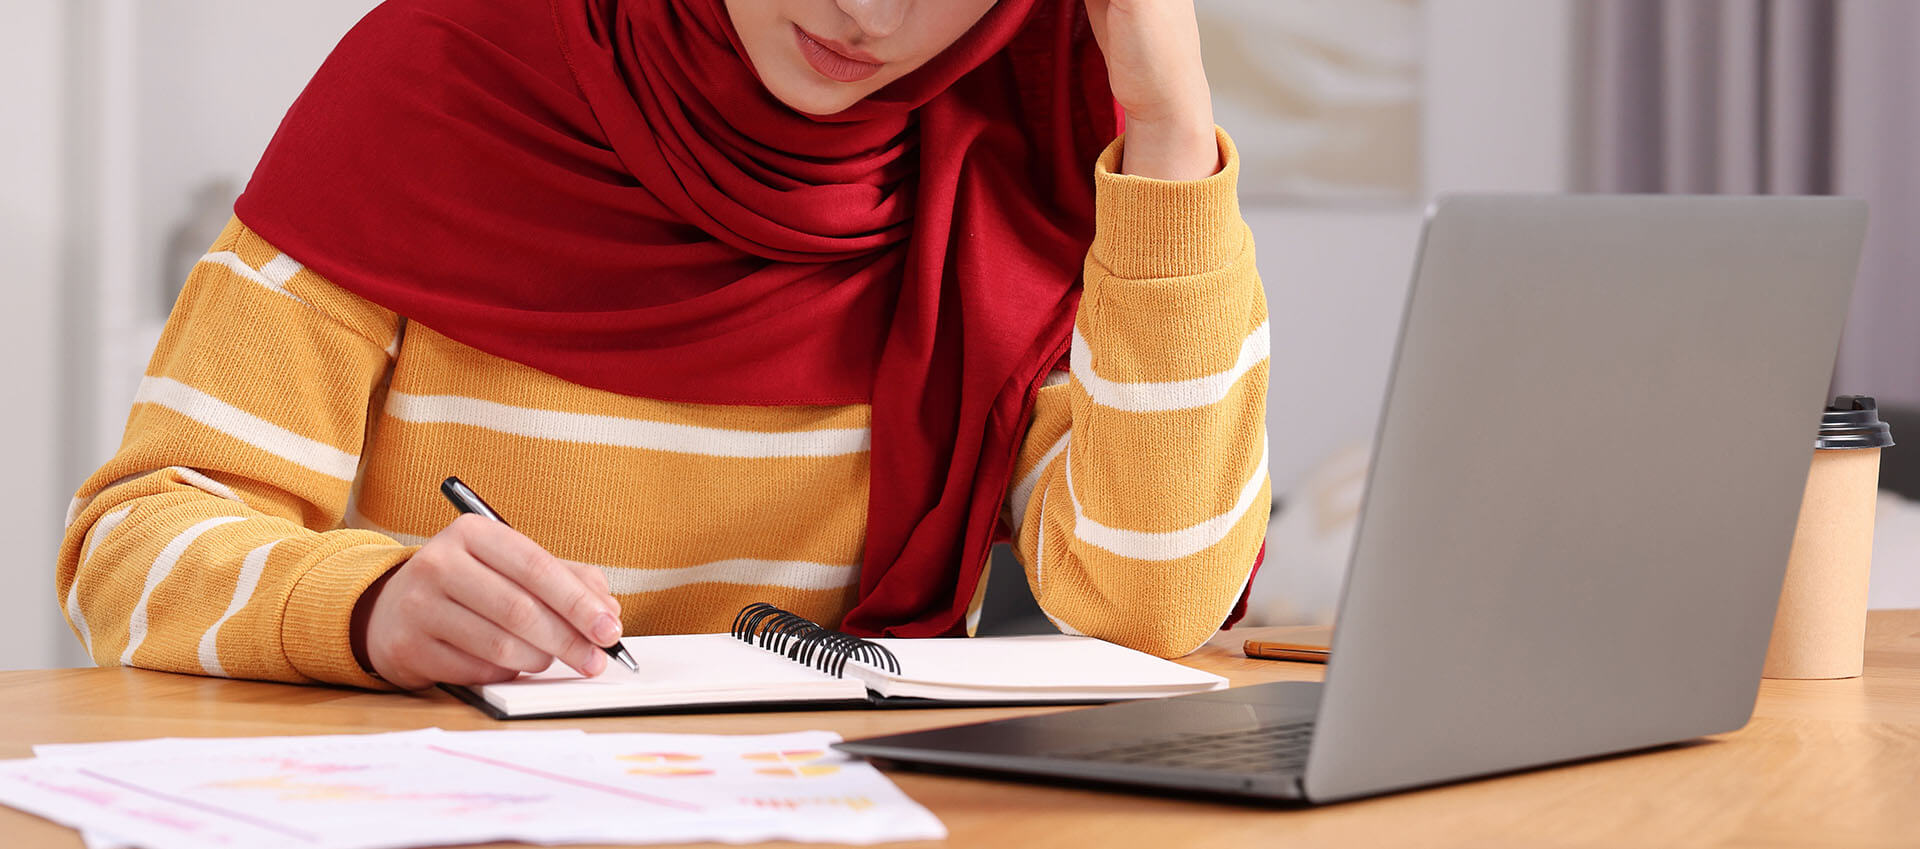 Woman in a red hijab thoughtfully working in front of a laptop.